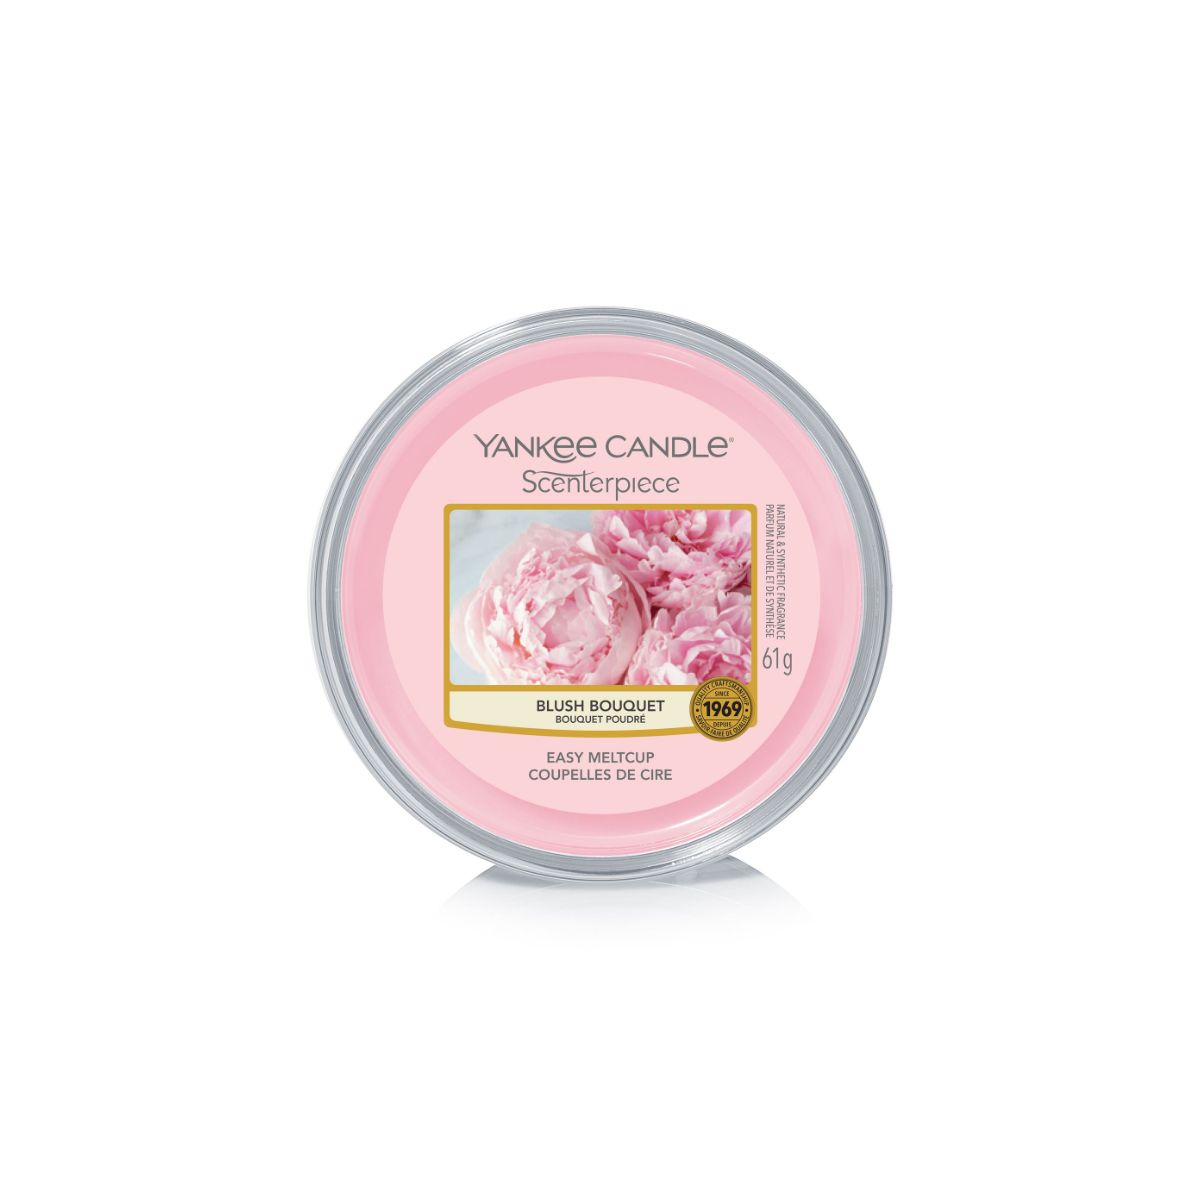 Easy MeltCup Scenterpiece Blush Bouquet Yankee Candle